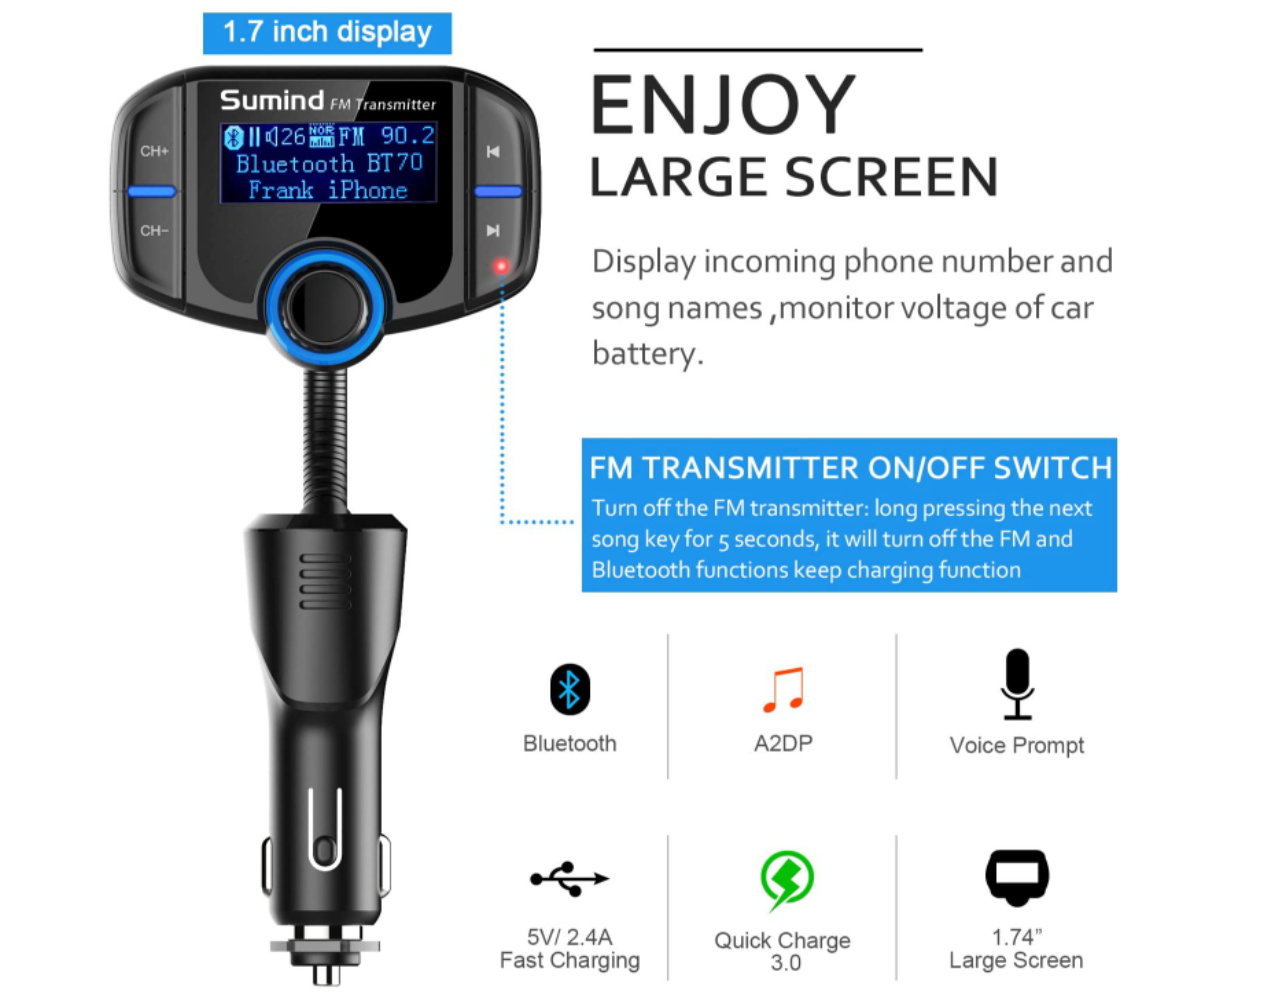 Tips to get the most out of your Bluetooth car transmitter